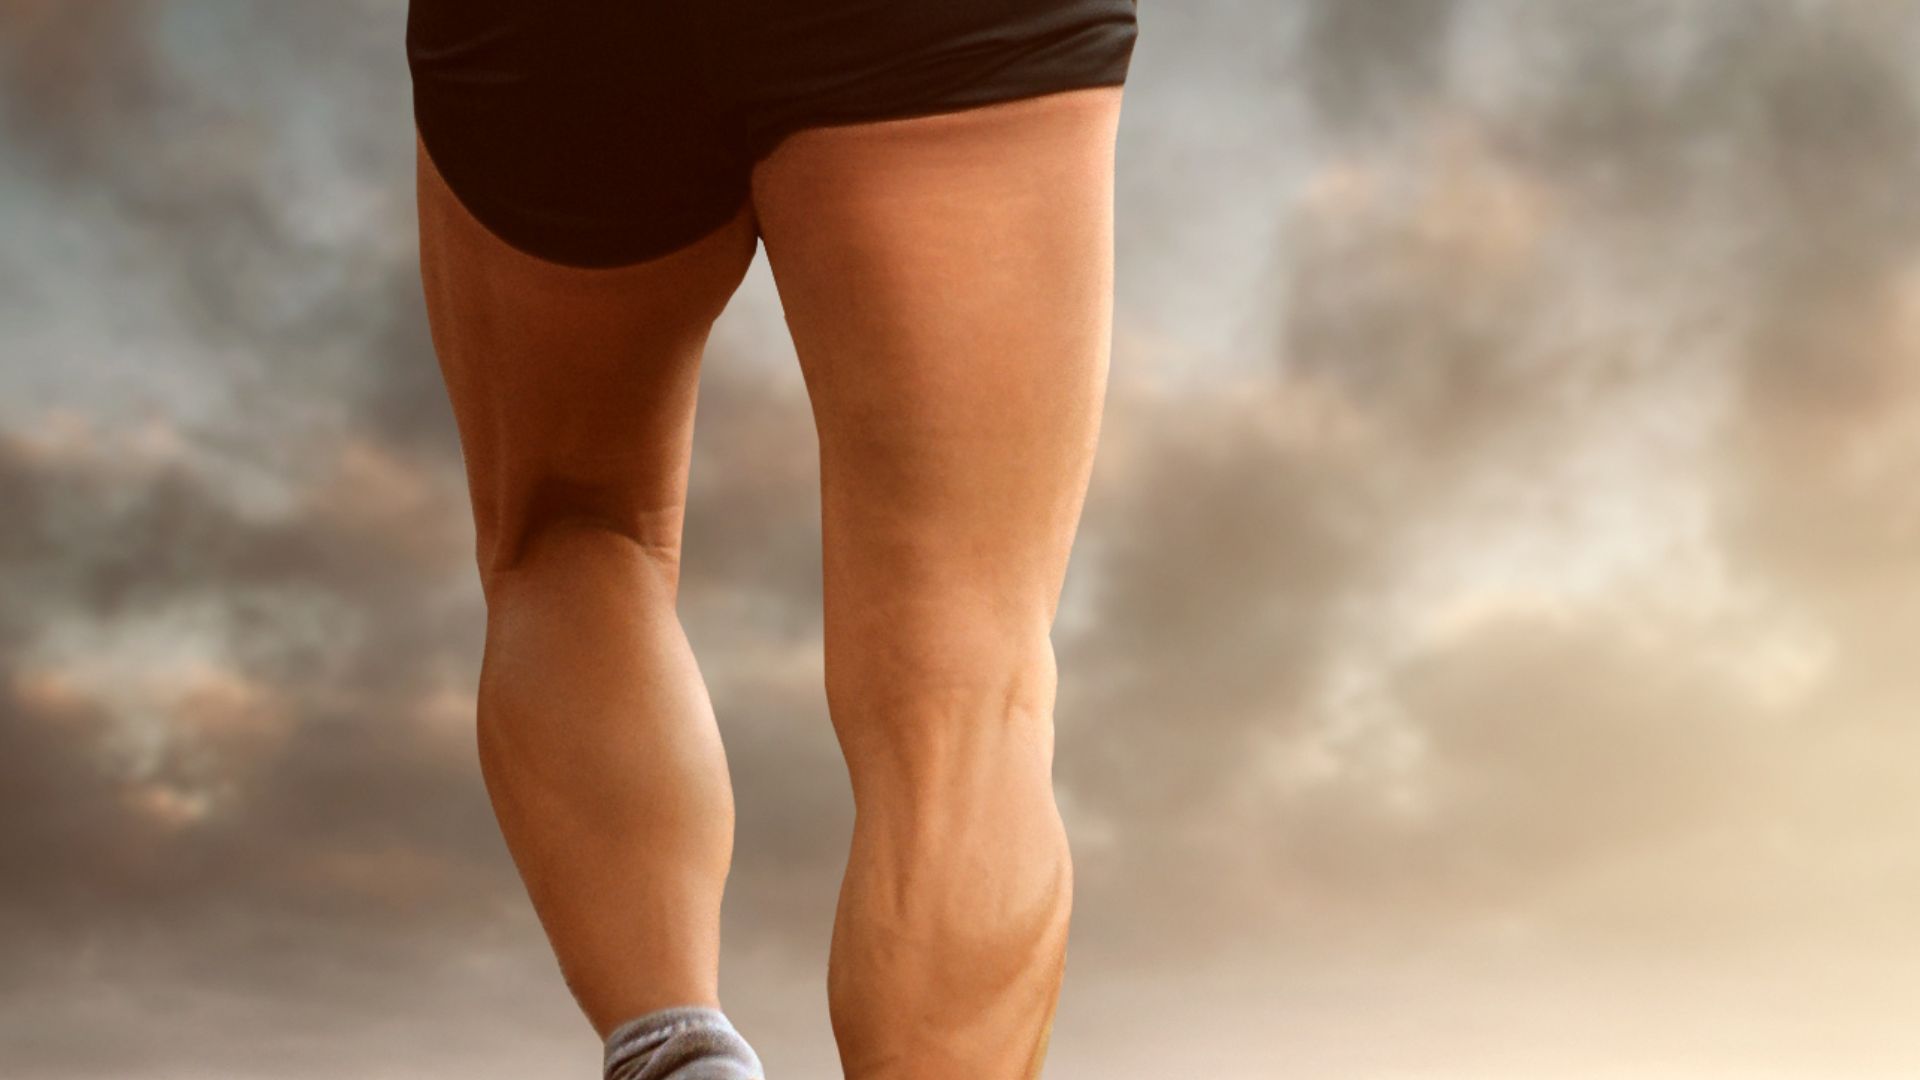 Do Squats Result In Larger Or Smaller Legs Overtime (Explained)